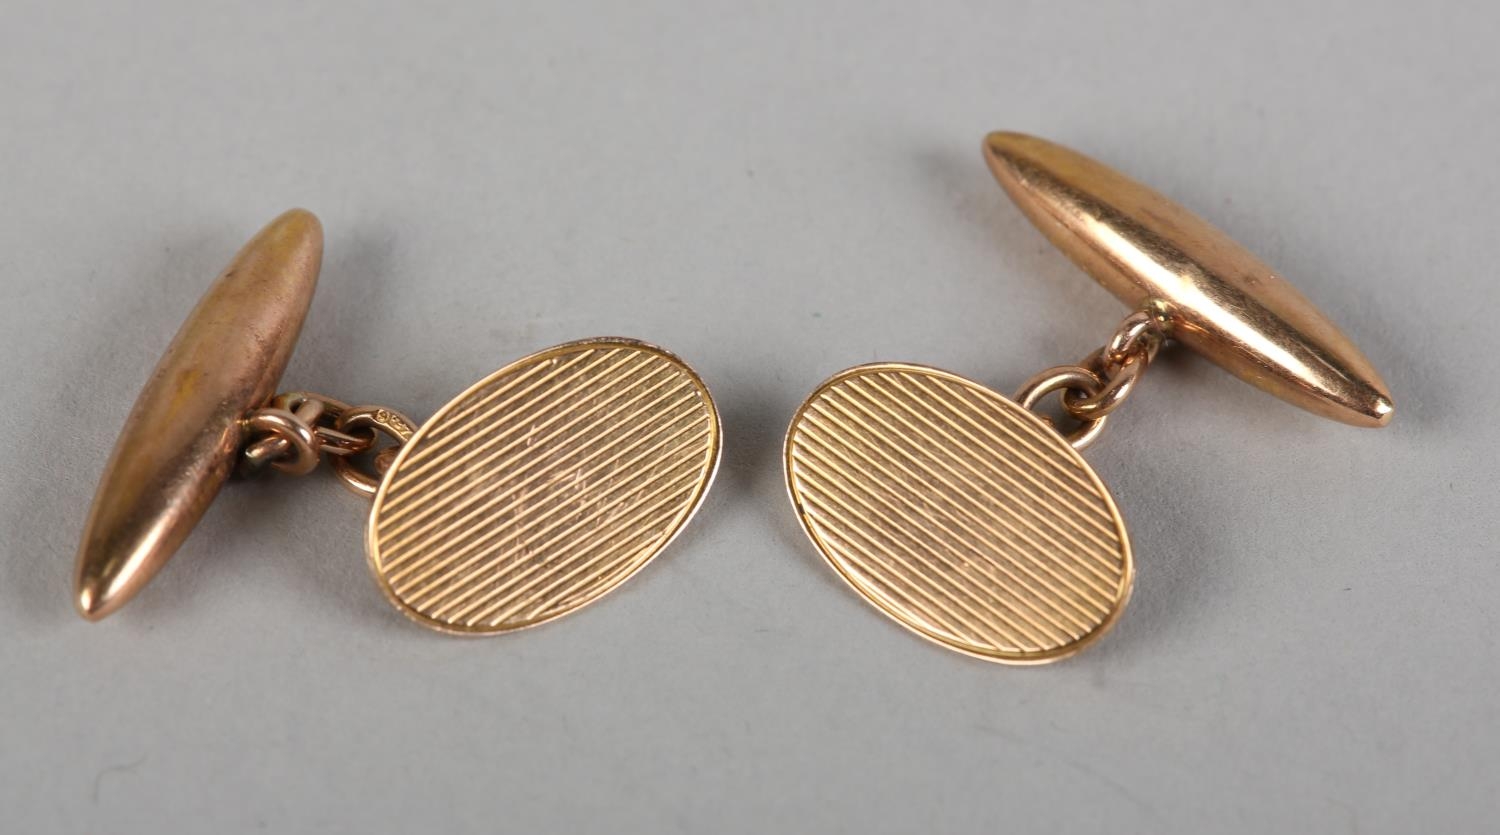 A PAIR OF GEORGE V CUFFLINKS BY G.H. JOHNSTONE & CO. in 9ct rose gold, the oval engine turned